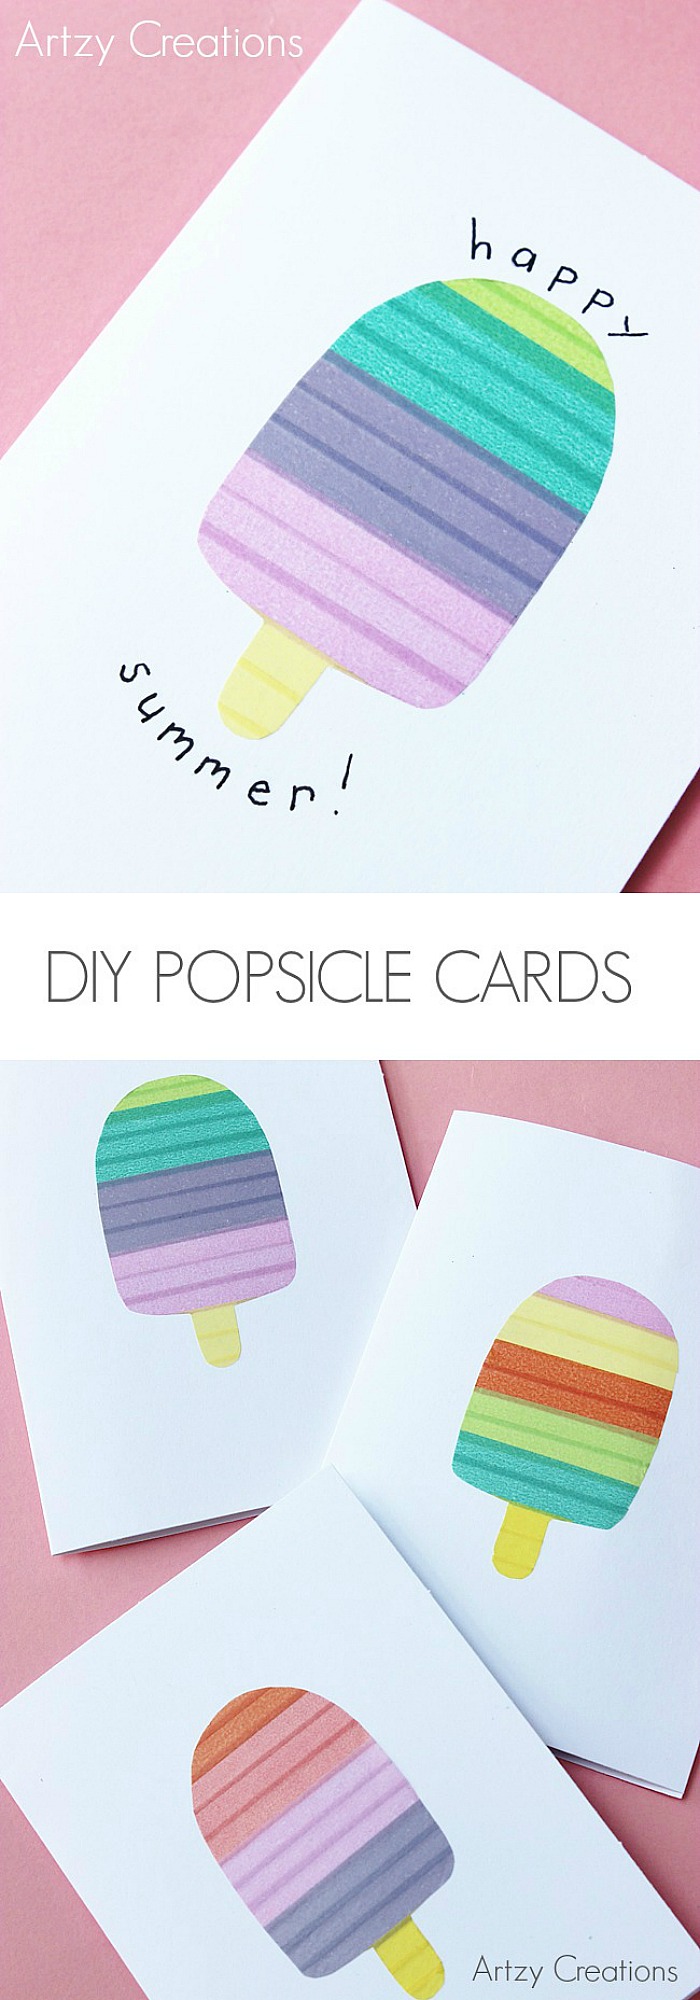 DIY Crafts - Handmade Popsicle Cards by artzycreations.com Pin it now and make  it later!